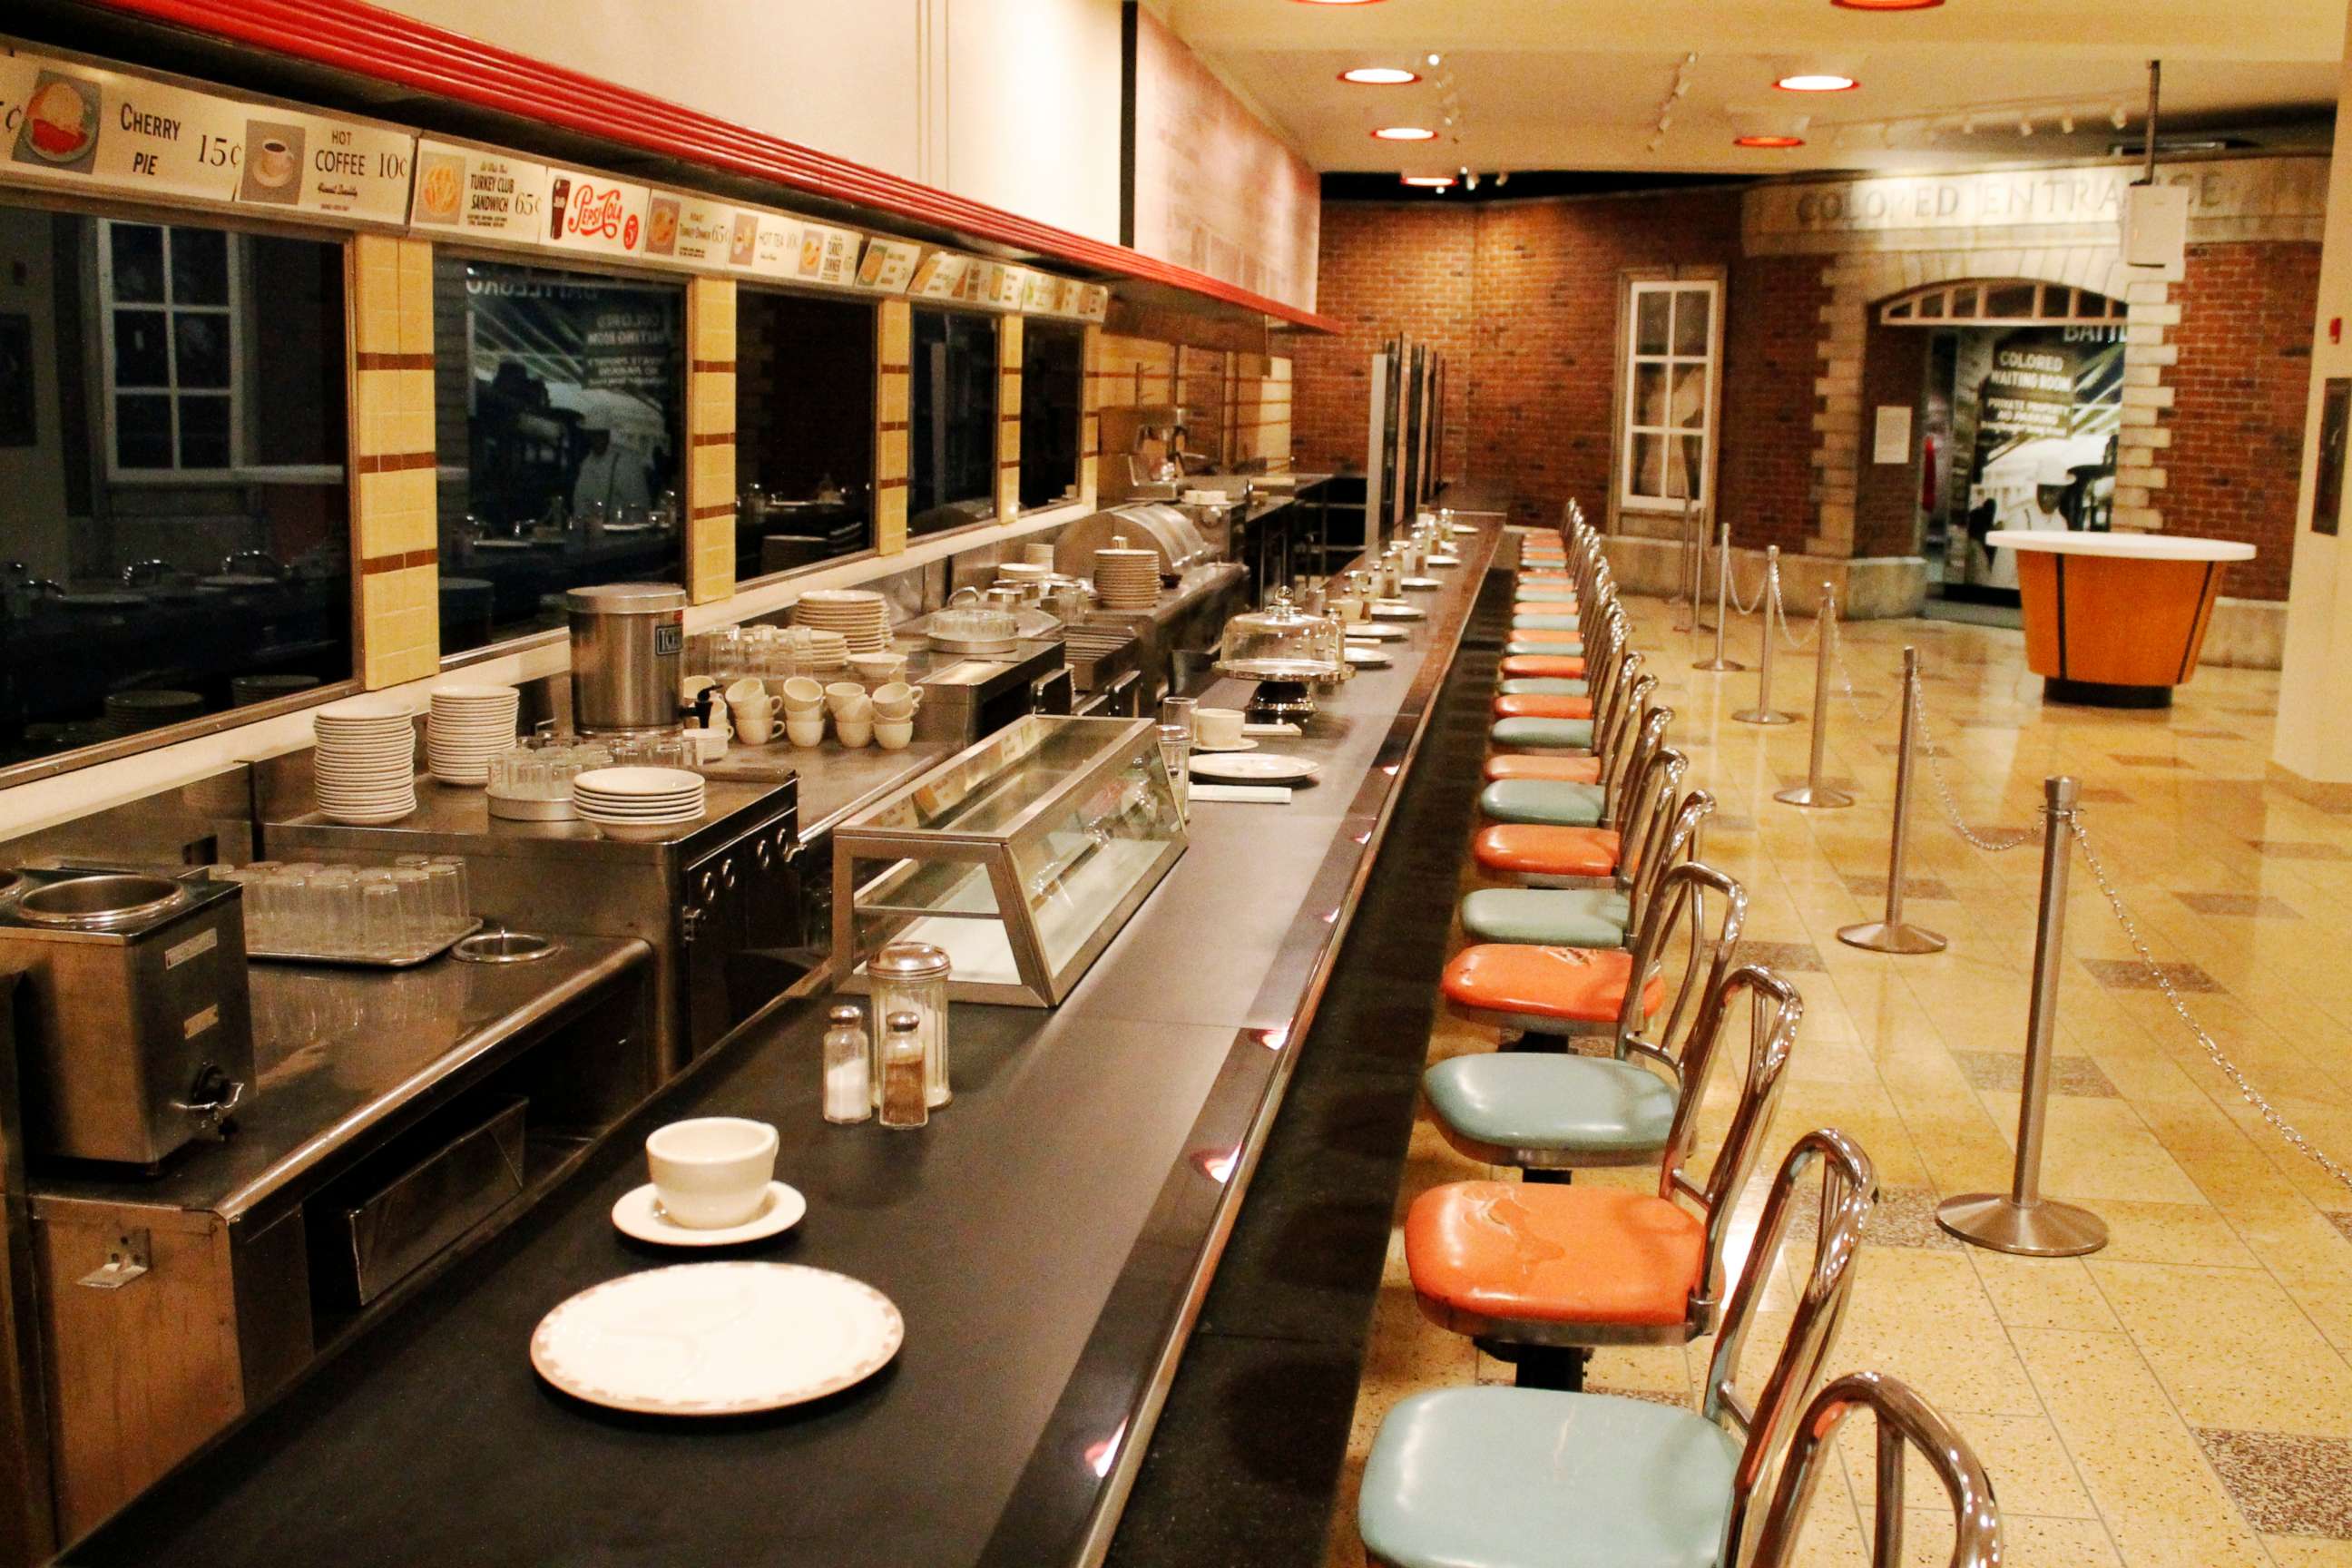 PHOTO: The F.W. Woolworth's lunch counter is part of the collection at the International Civil Rights Center and Museum in Greensboro, N.C., on display, Sept. 16, 2016.